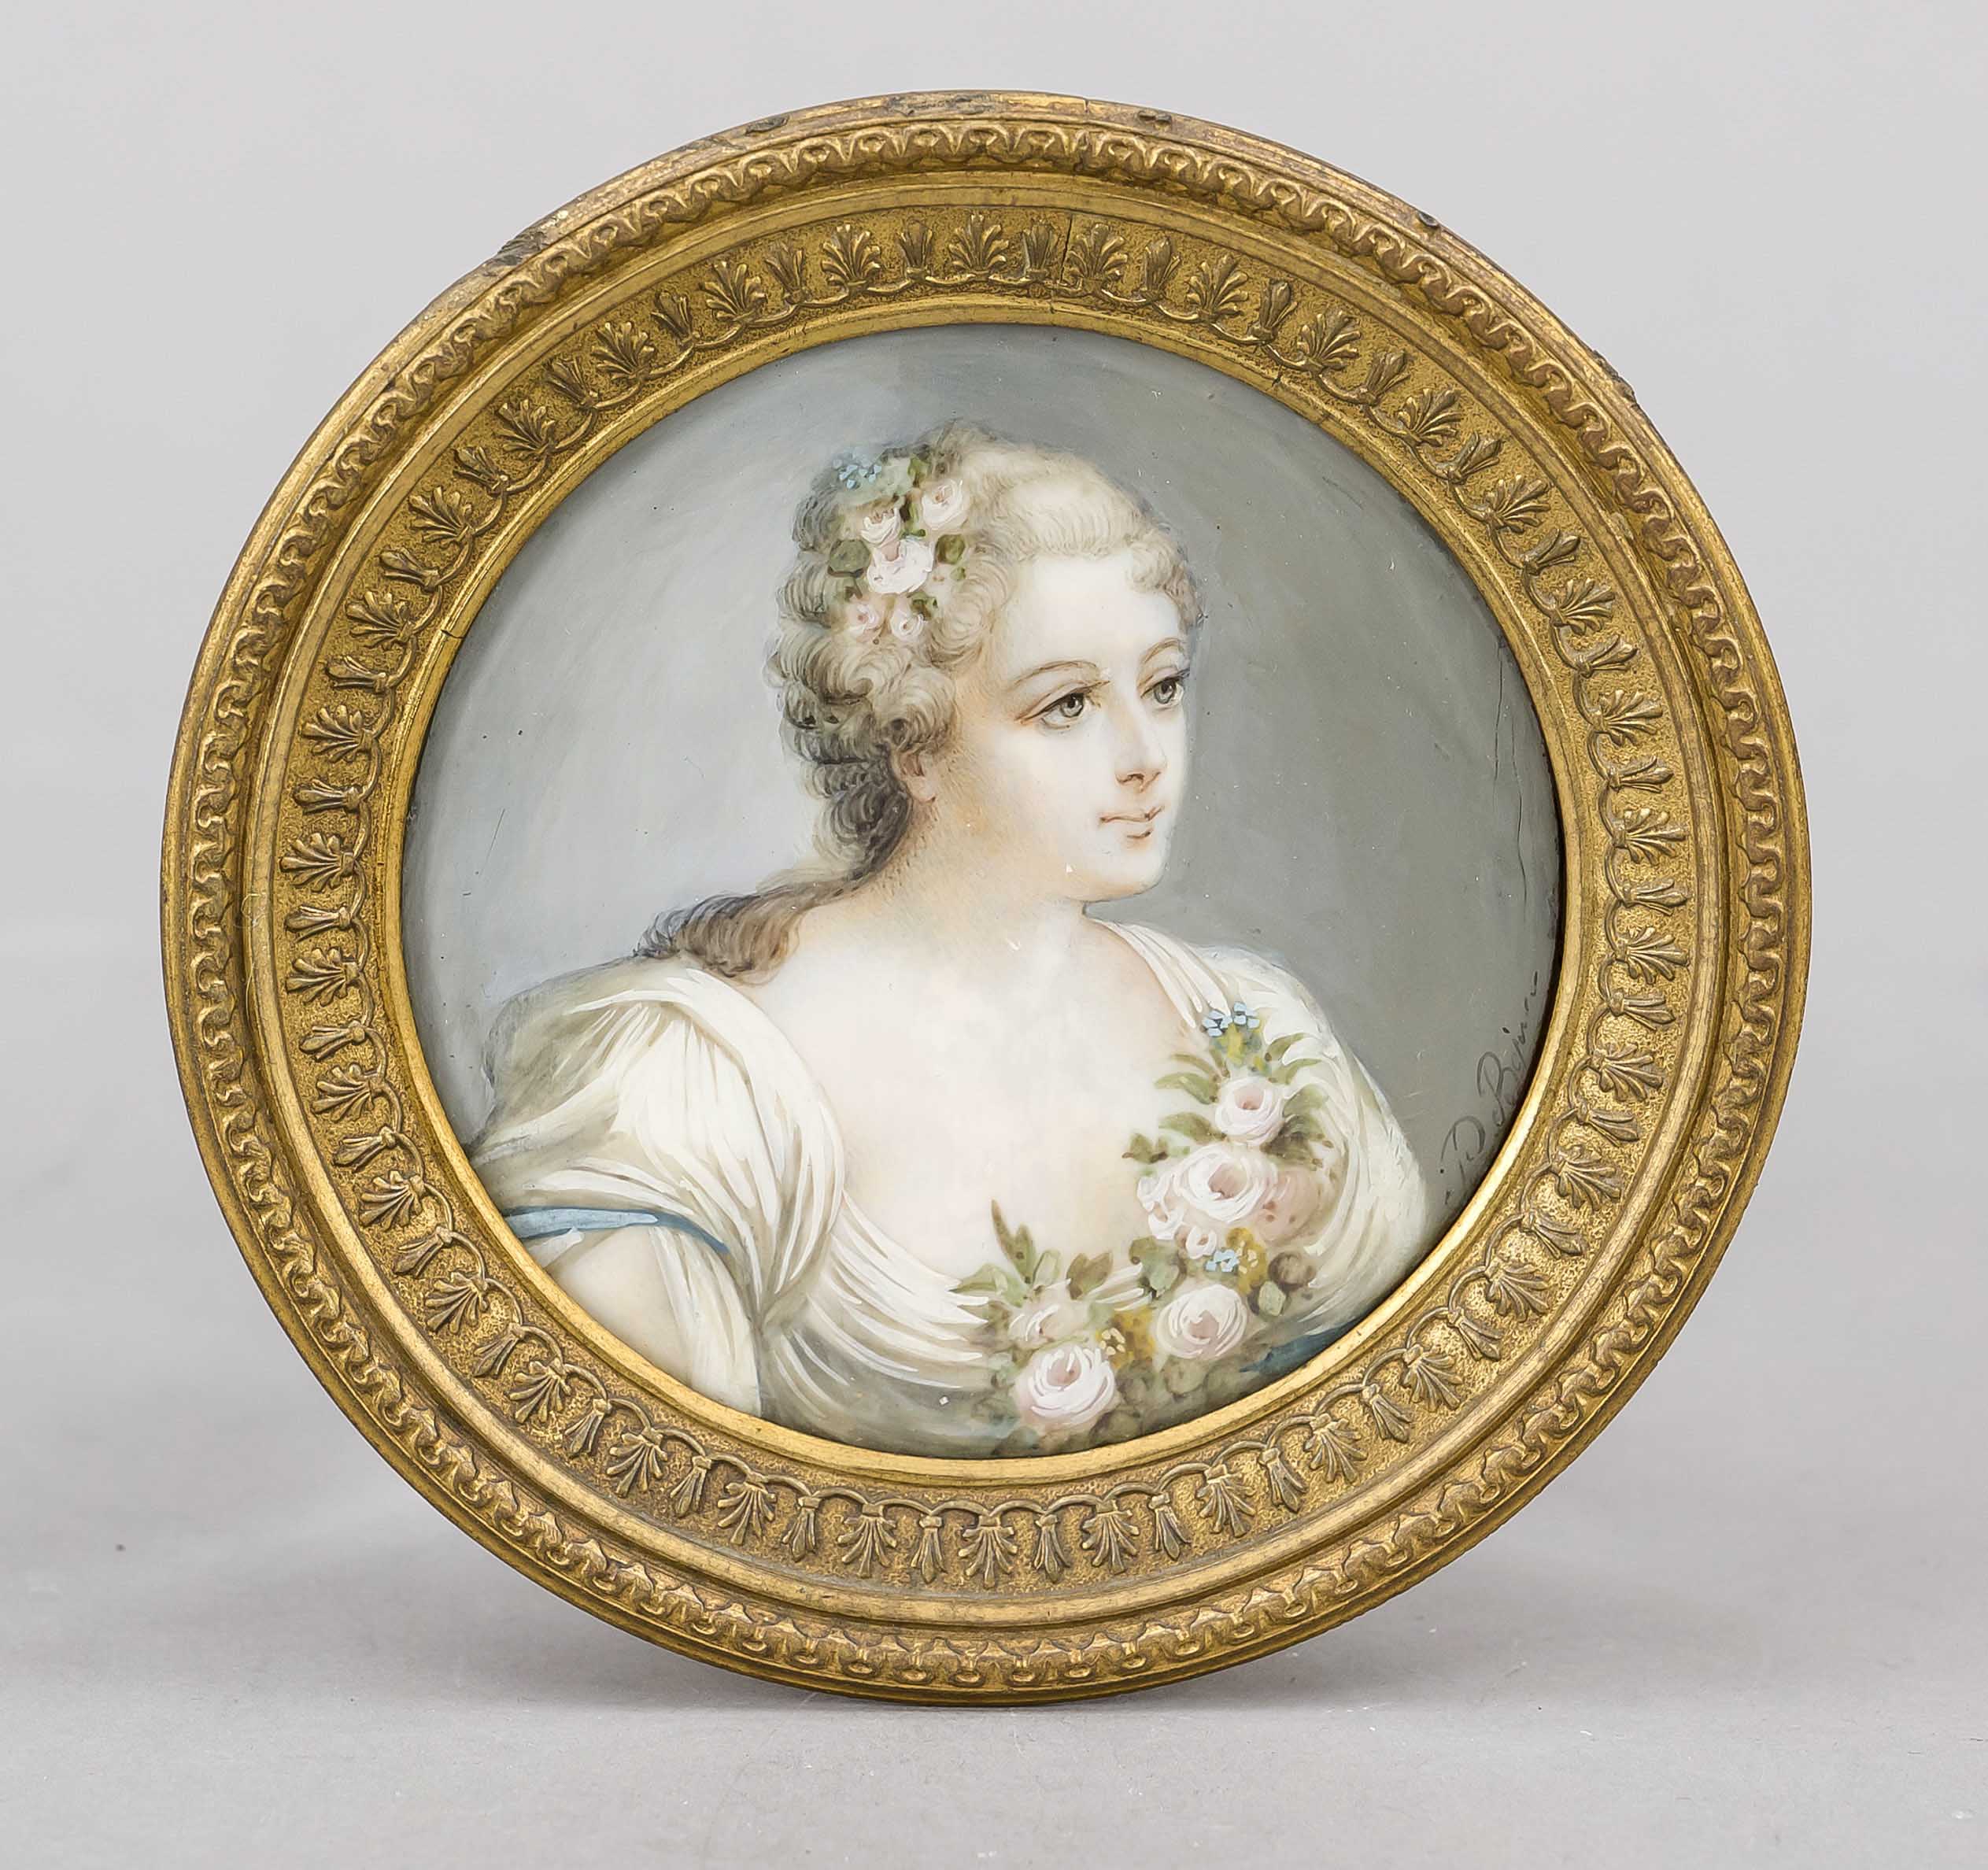 Miniature, 19th century, polychrome tempera painting on bone plate, unopened, round portrait of a